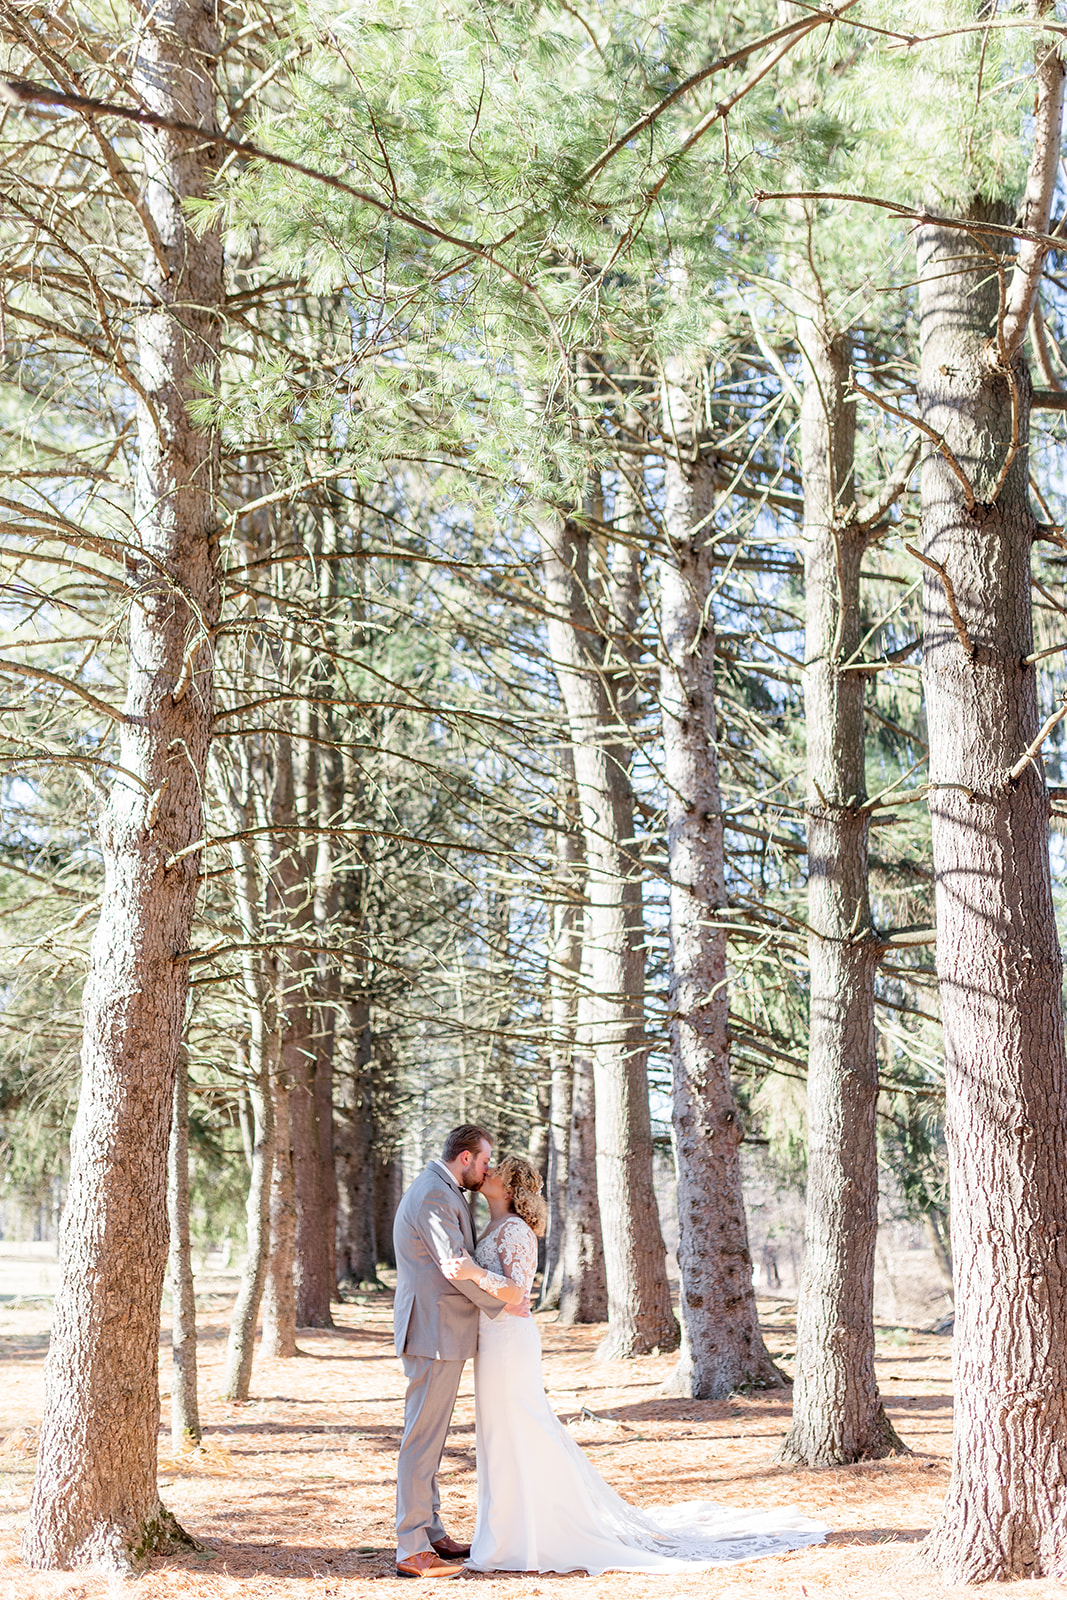 Newlyweds kiss while standing in a path lined with tall pine trees